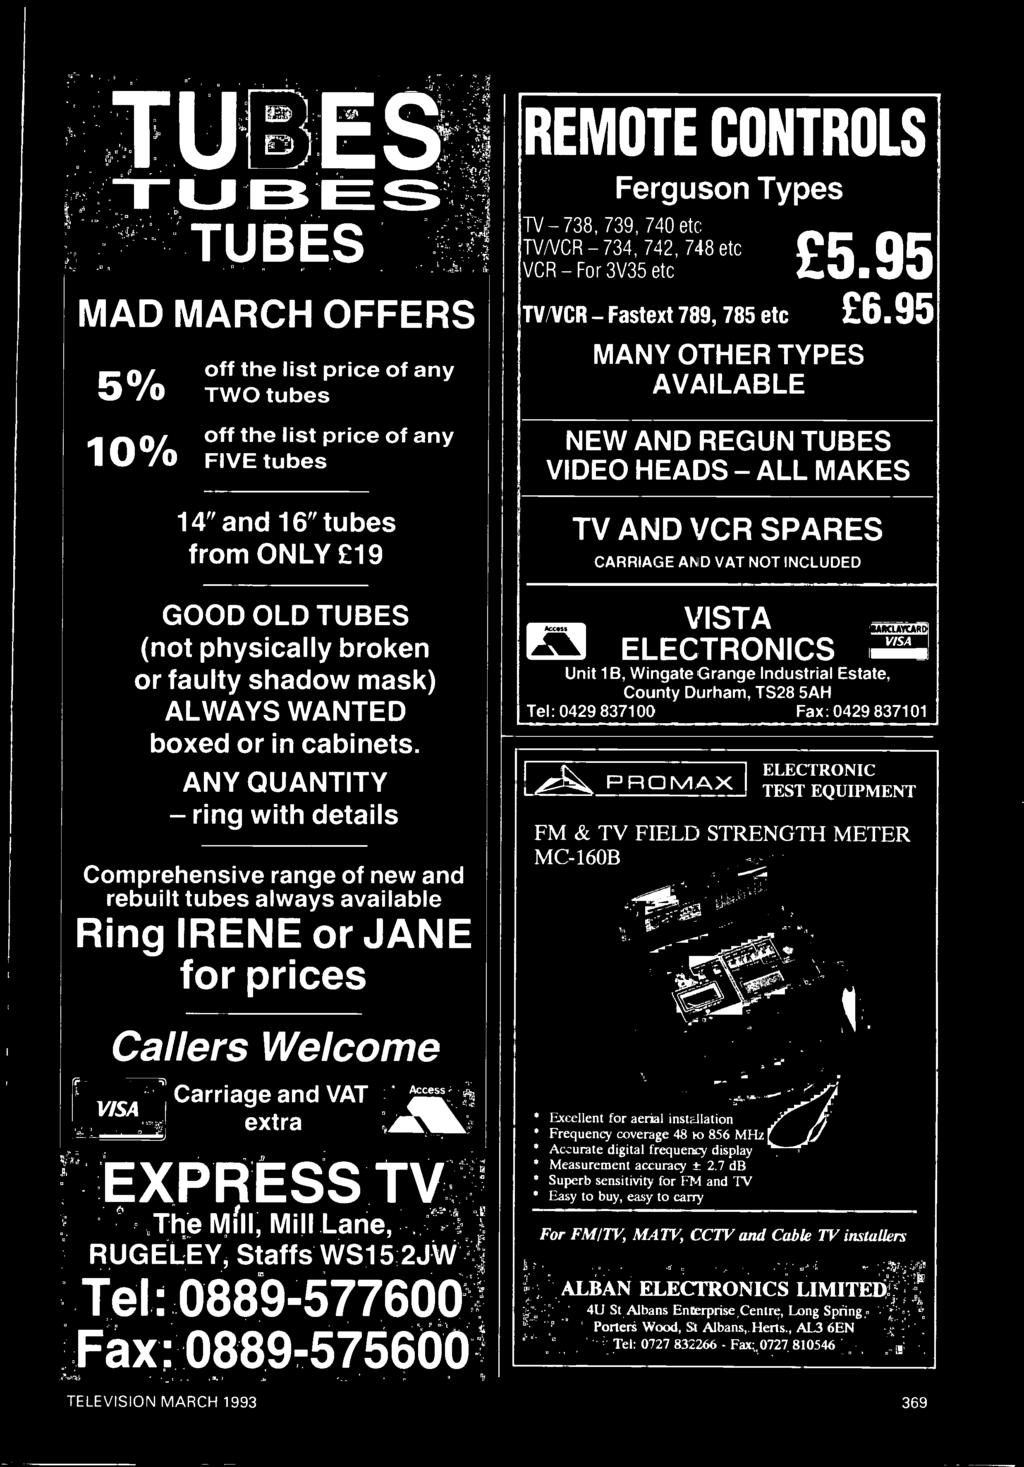 ANY QUANTITY - ring with details Comprehensive range of new and rebuilt tubes always available Ring IRENE or JANE for prices Callers Welcome Carriage and VAT extra Access EXPRESS TV The Mill, Mill